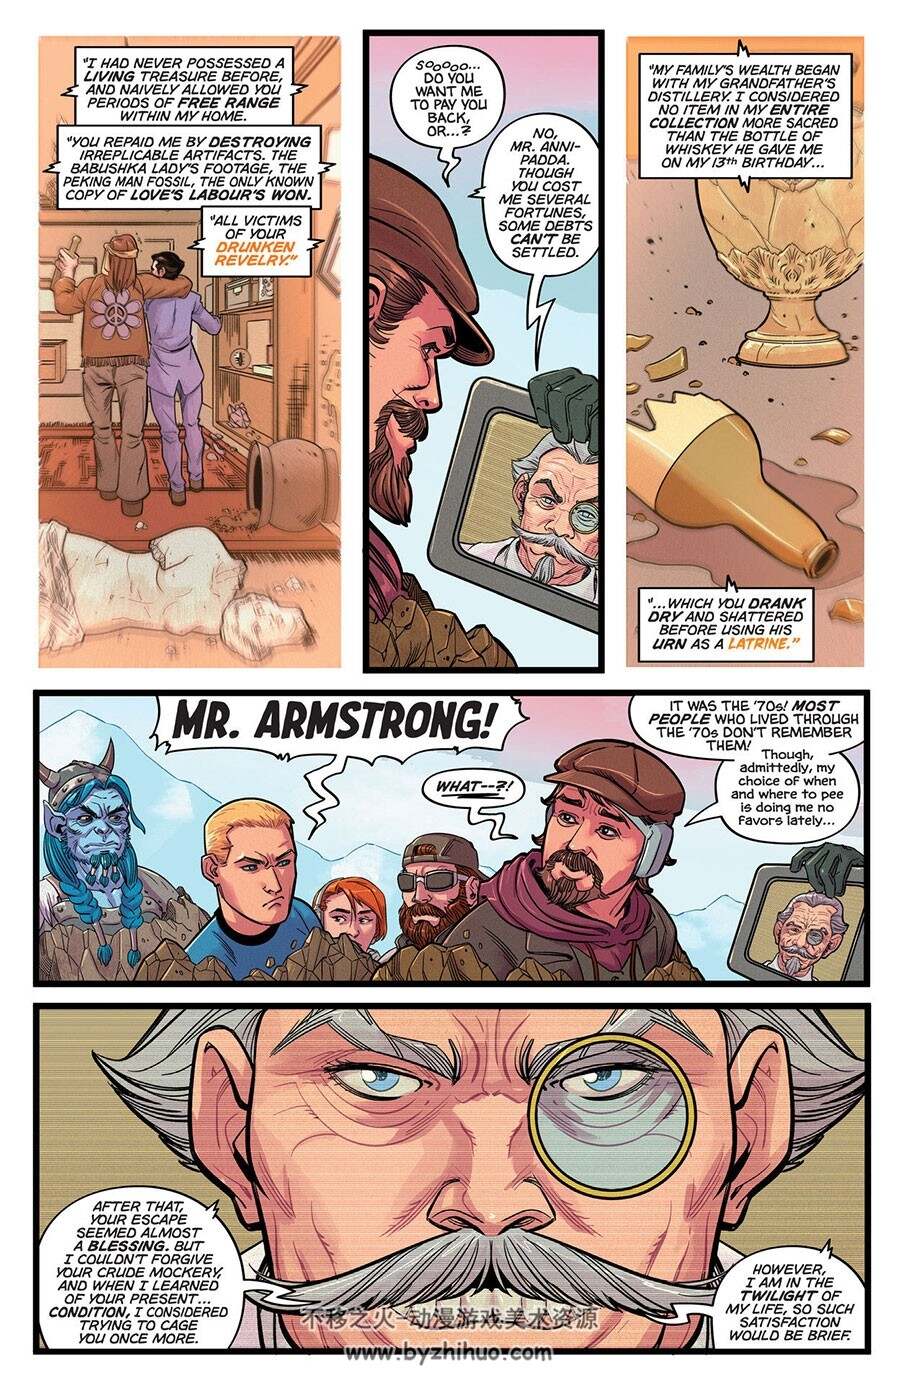 Archer & Armstrong Forever 第004册 漫画 百度网盘下载